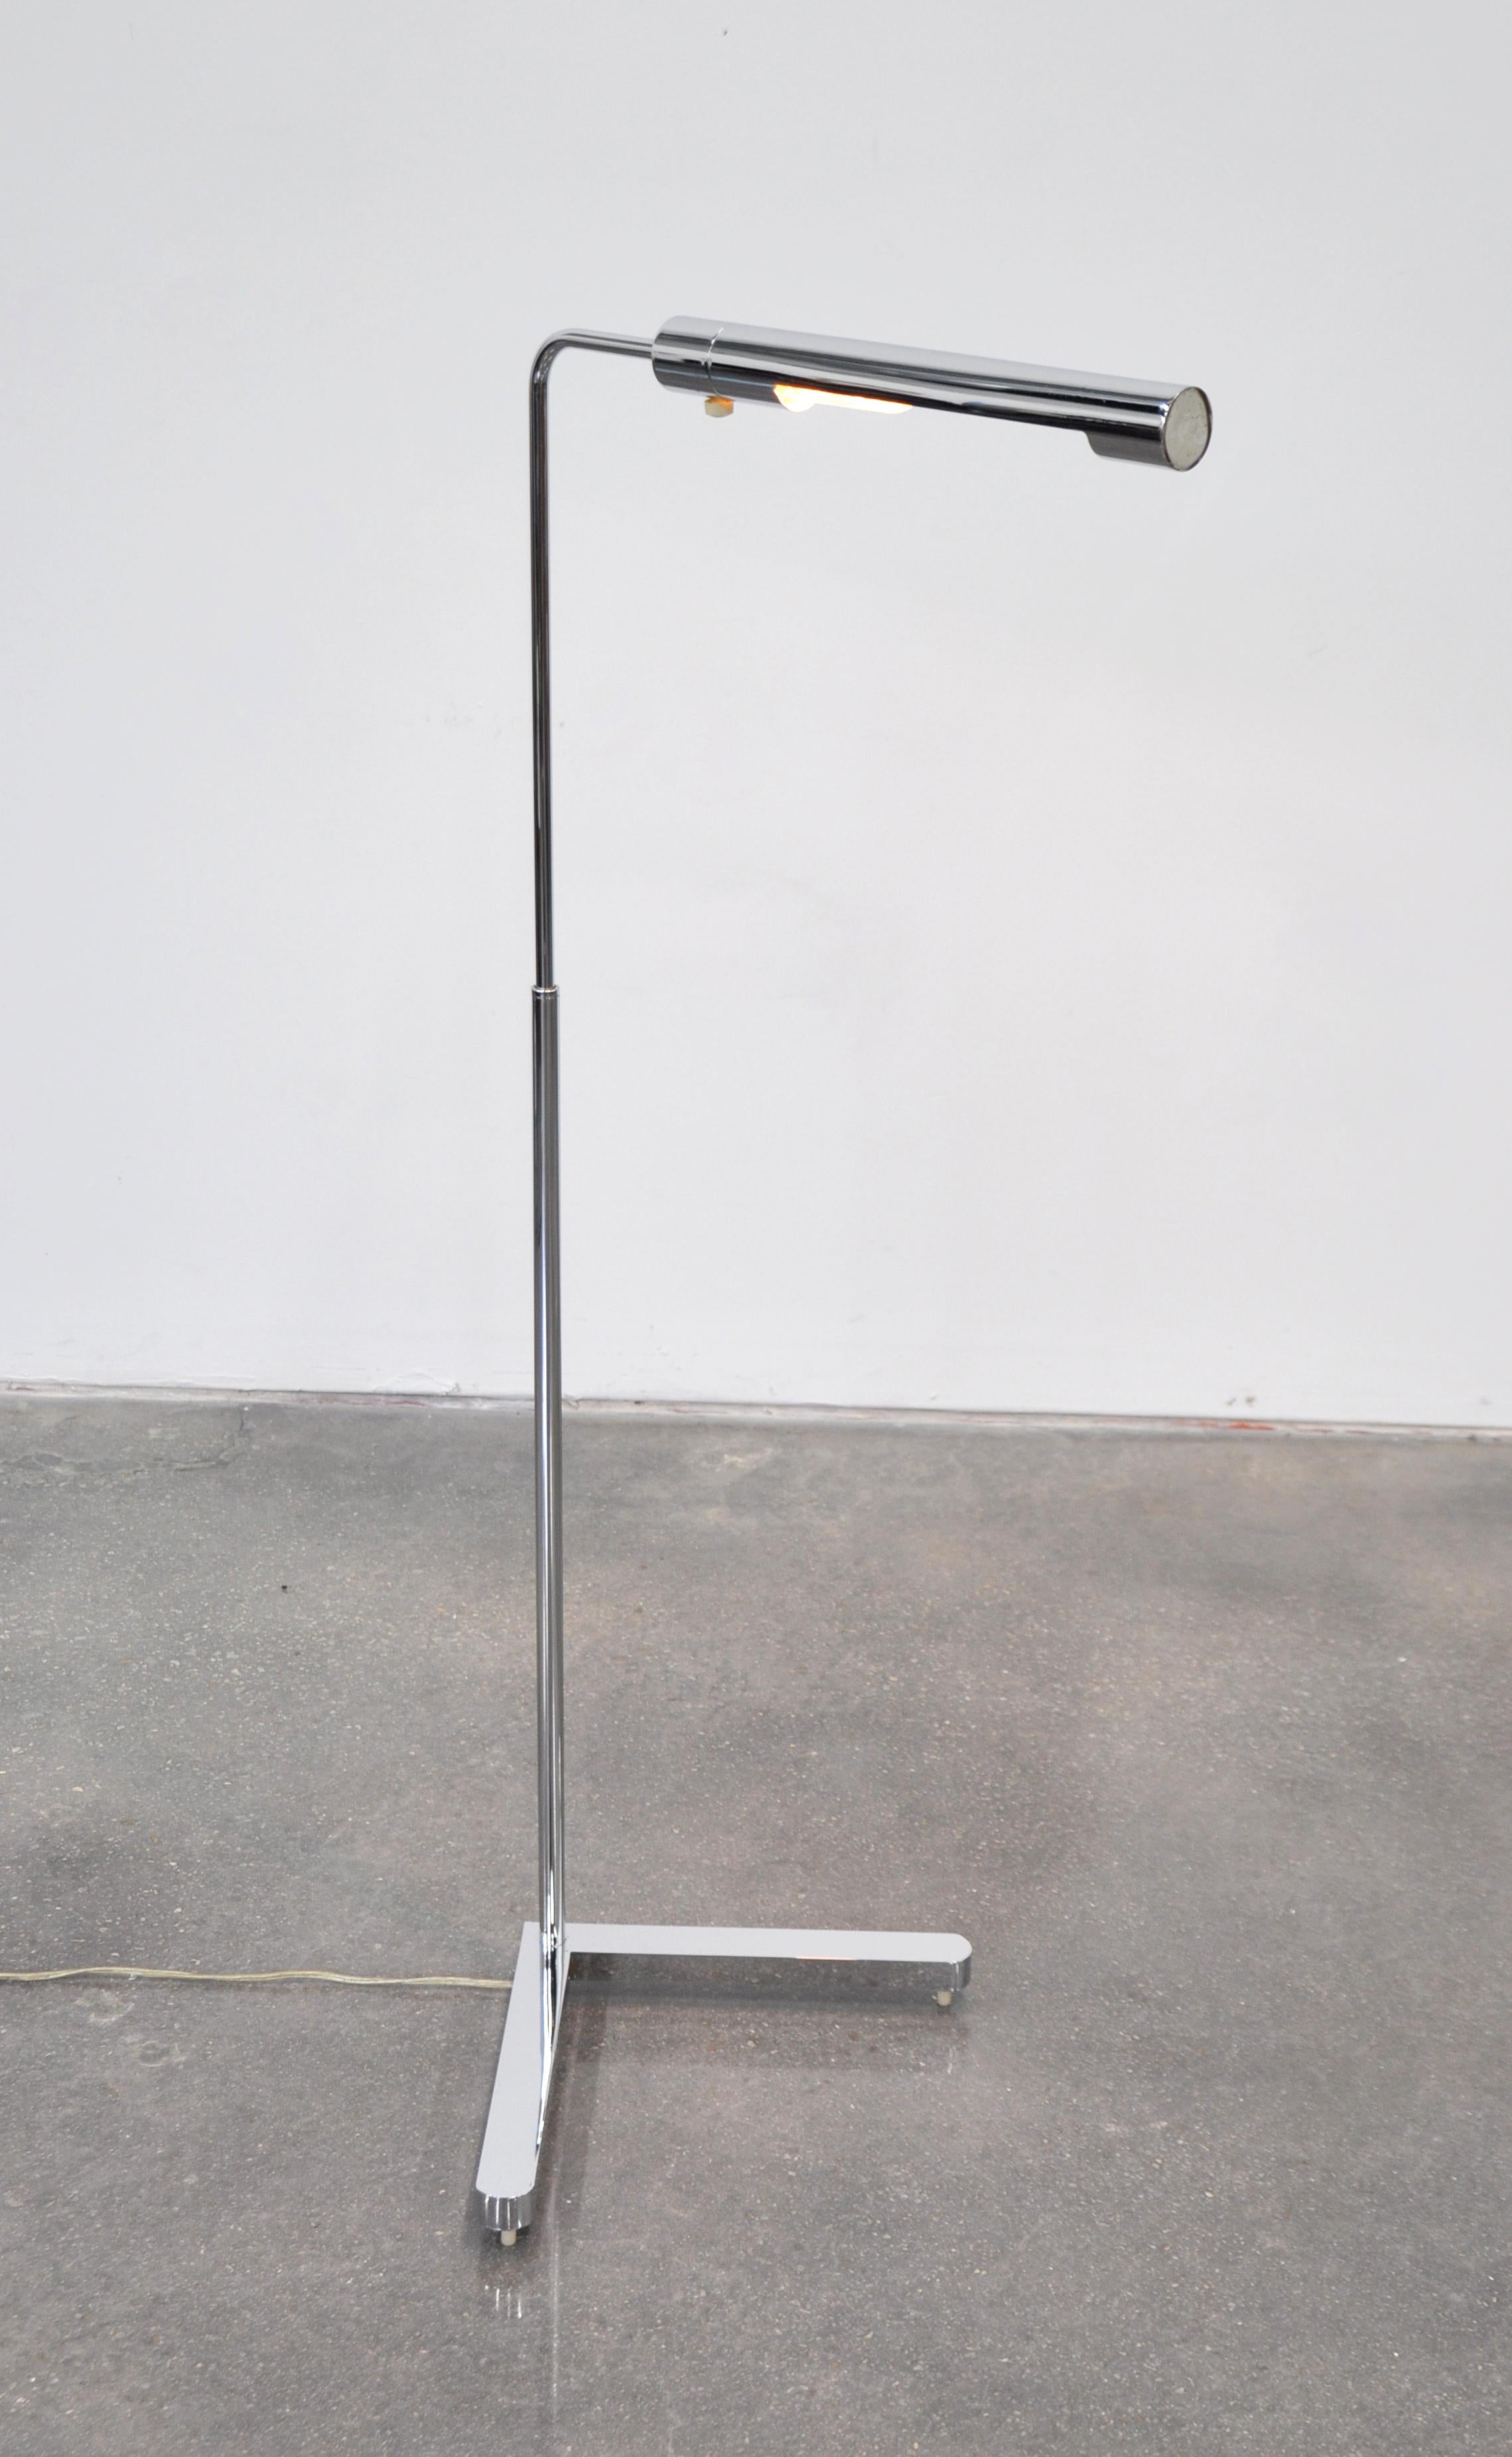 A great vintage Mid-Century Modern pharmacy corner task lamp with polished chrome finish, V-base and a long, cylindrical shade with full range electronic dimmer. The reading lamp, in the Cedric Hartman style, has an adjustable height to a maximum of